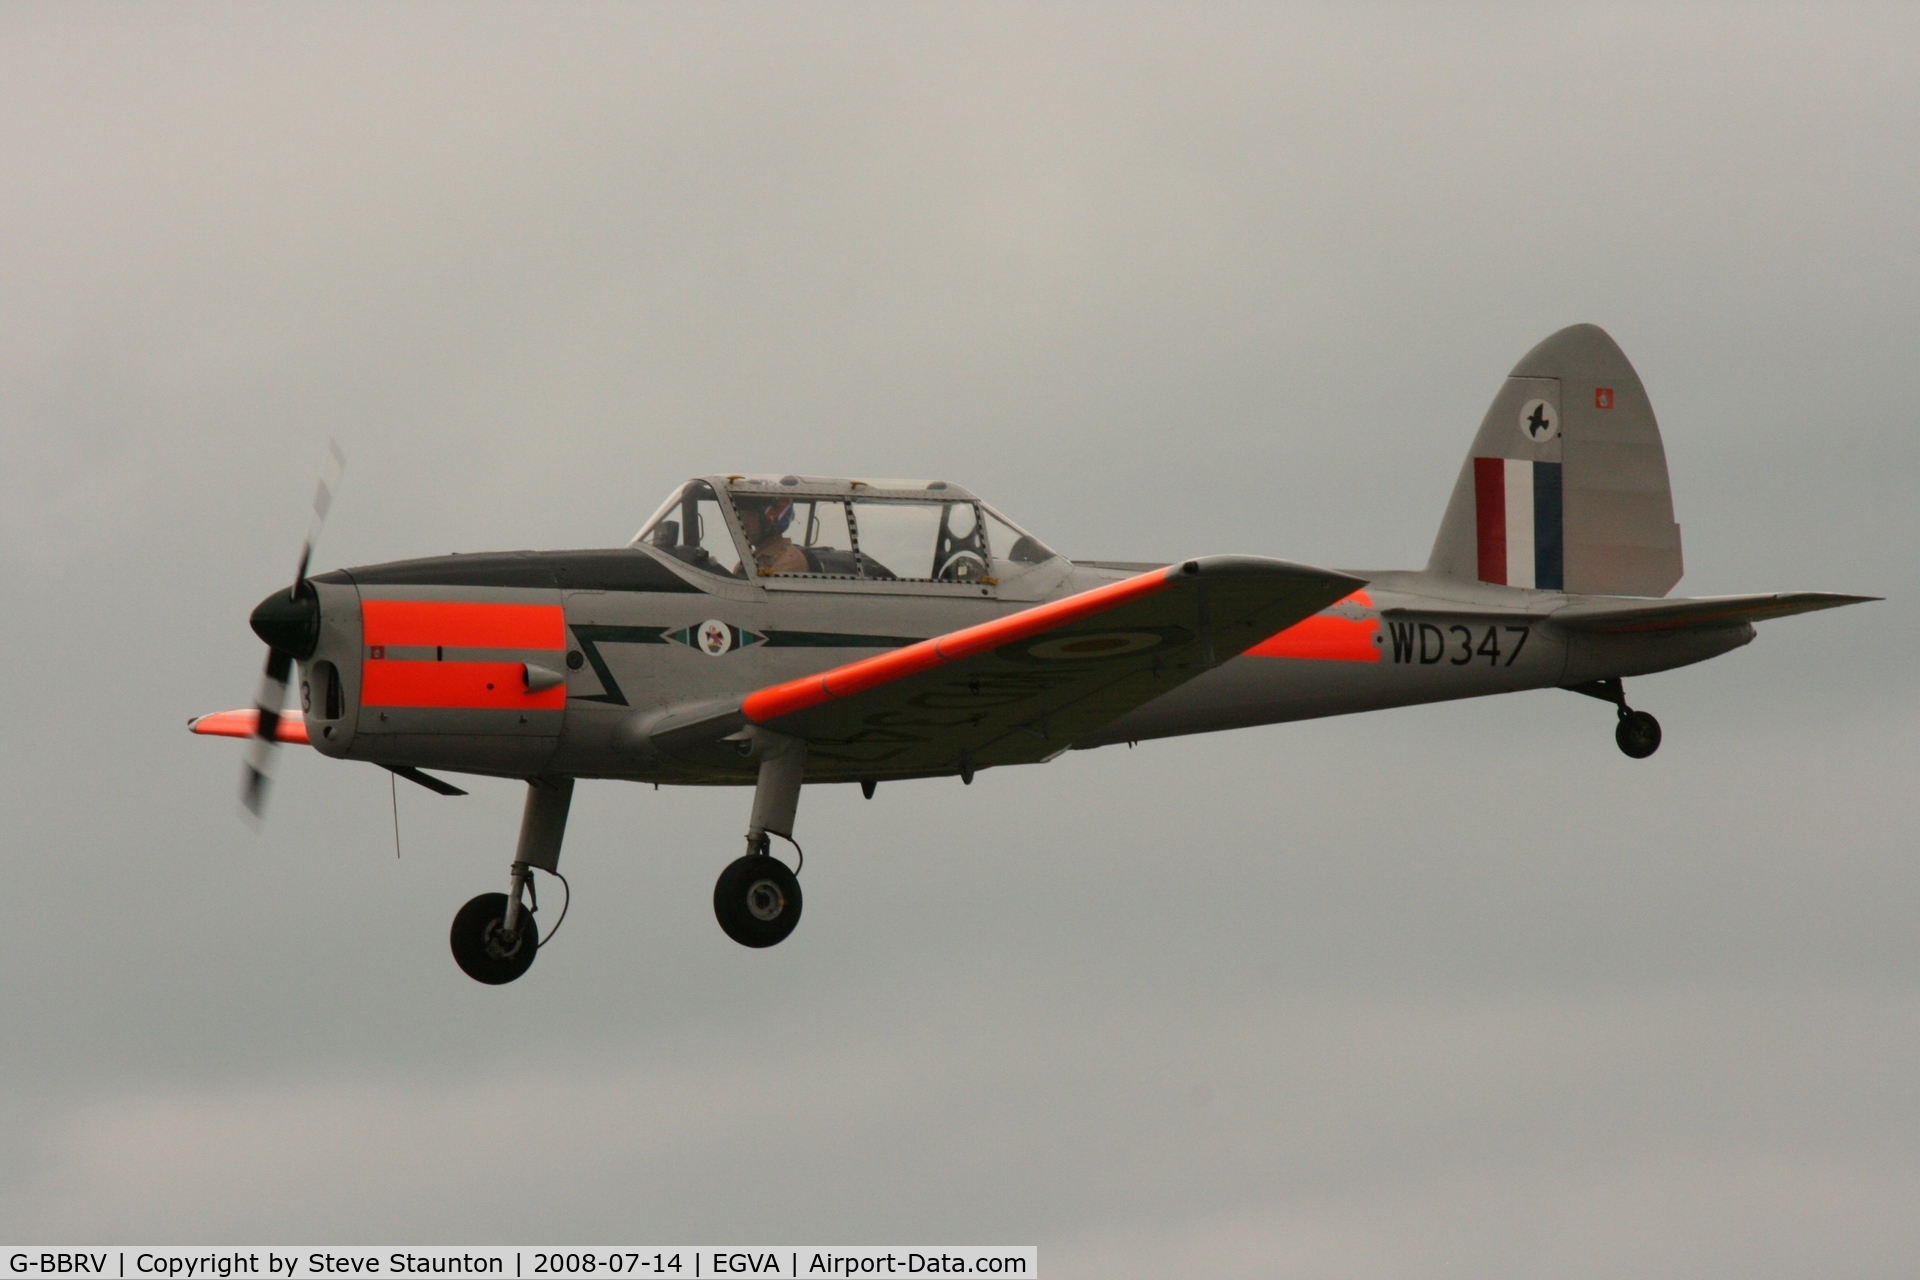 G-BBRV, 1951 De Havilland DHC-1 Chipmunk T.10 C/N C1/0284, Taken at the Royal International Air Tattoo 2008 during arrivals and departures (show days cancelled due to bad weather)